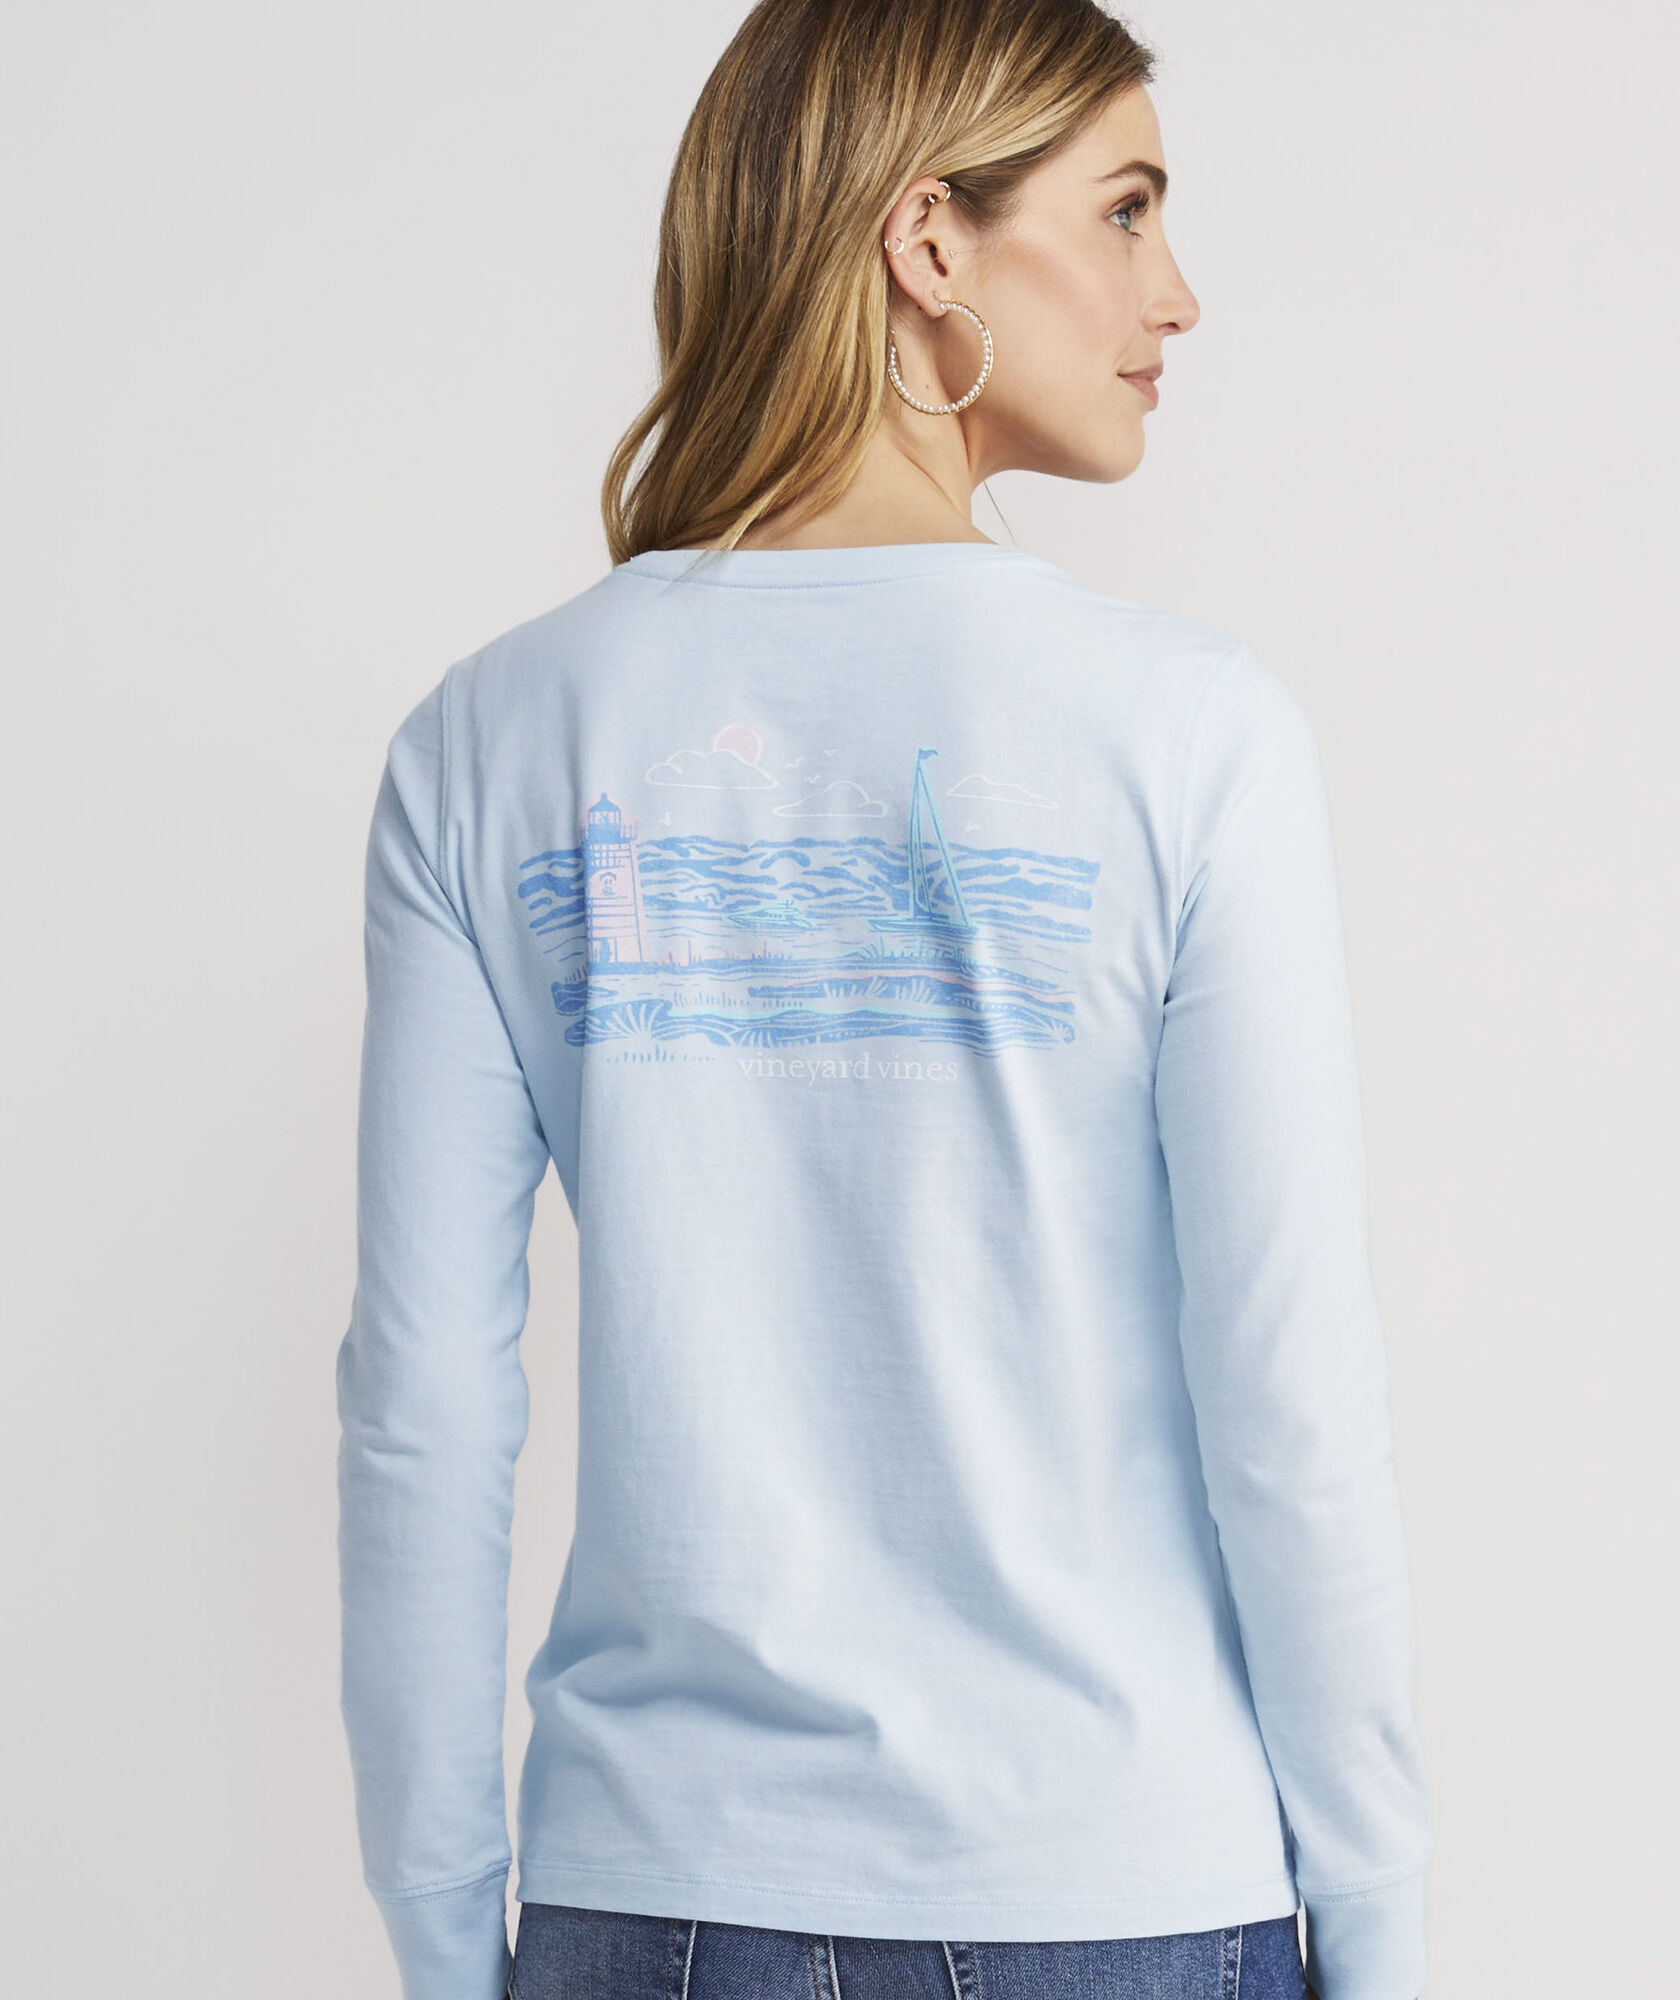 OUTLET Women's Light and Ships Long-Sleeve Pocket Tee